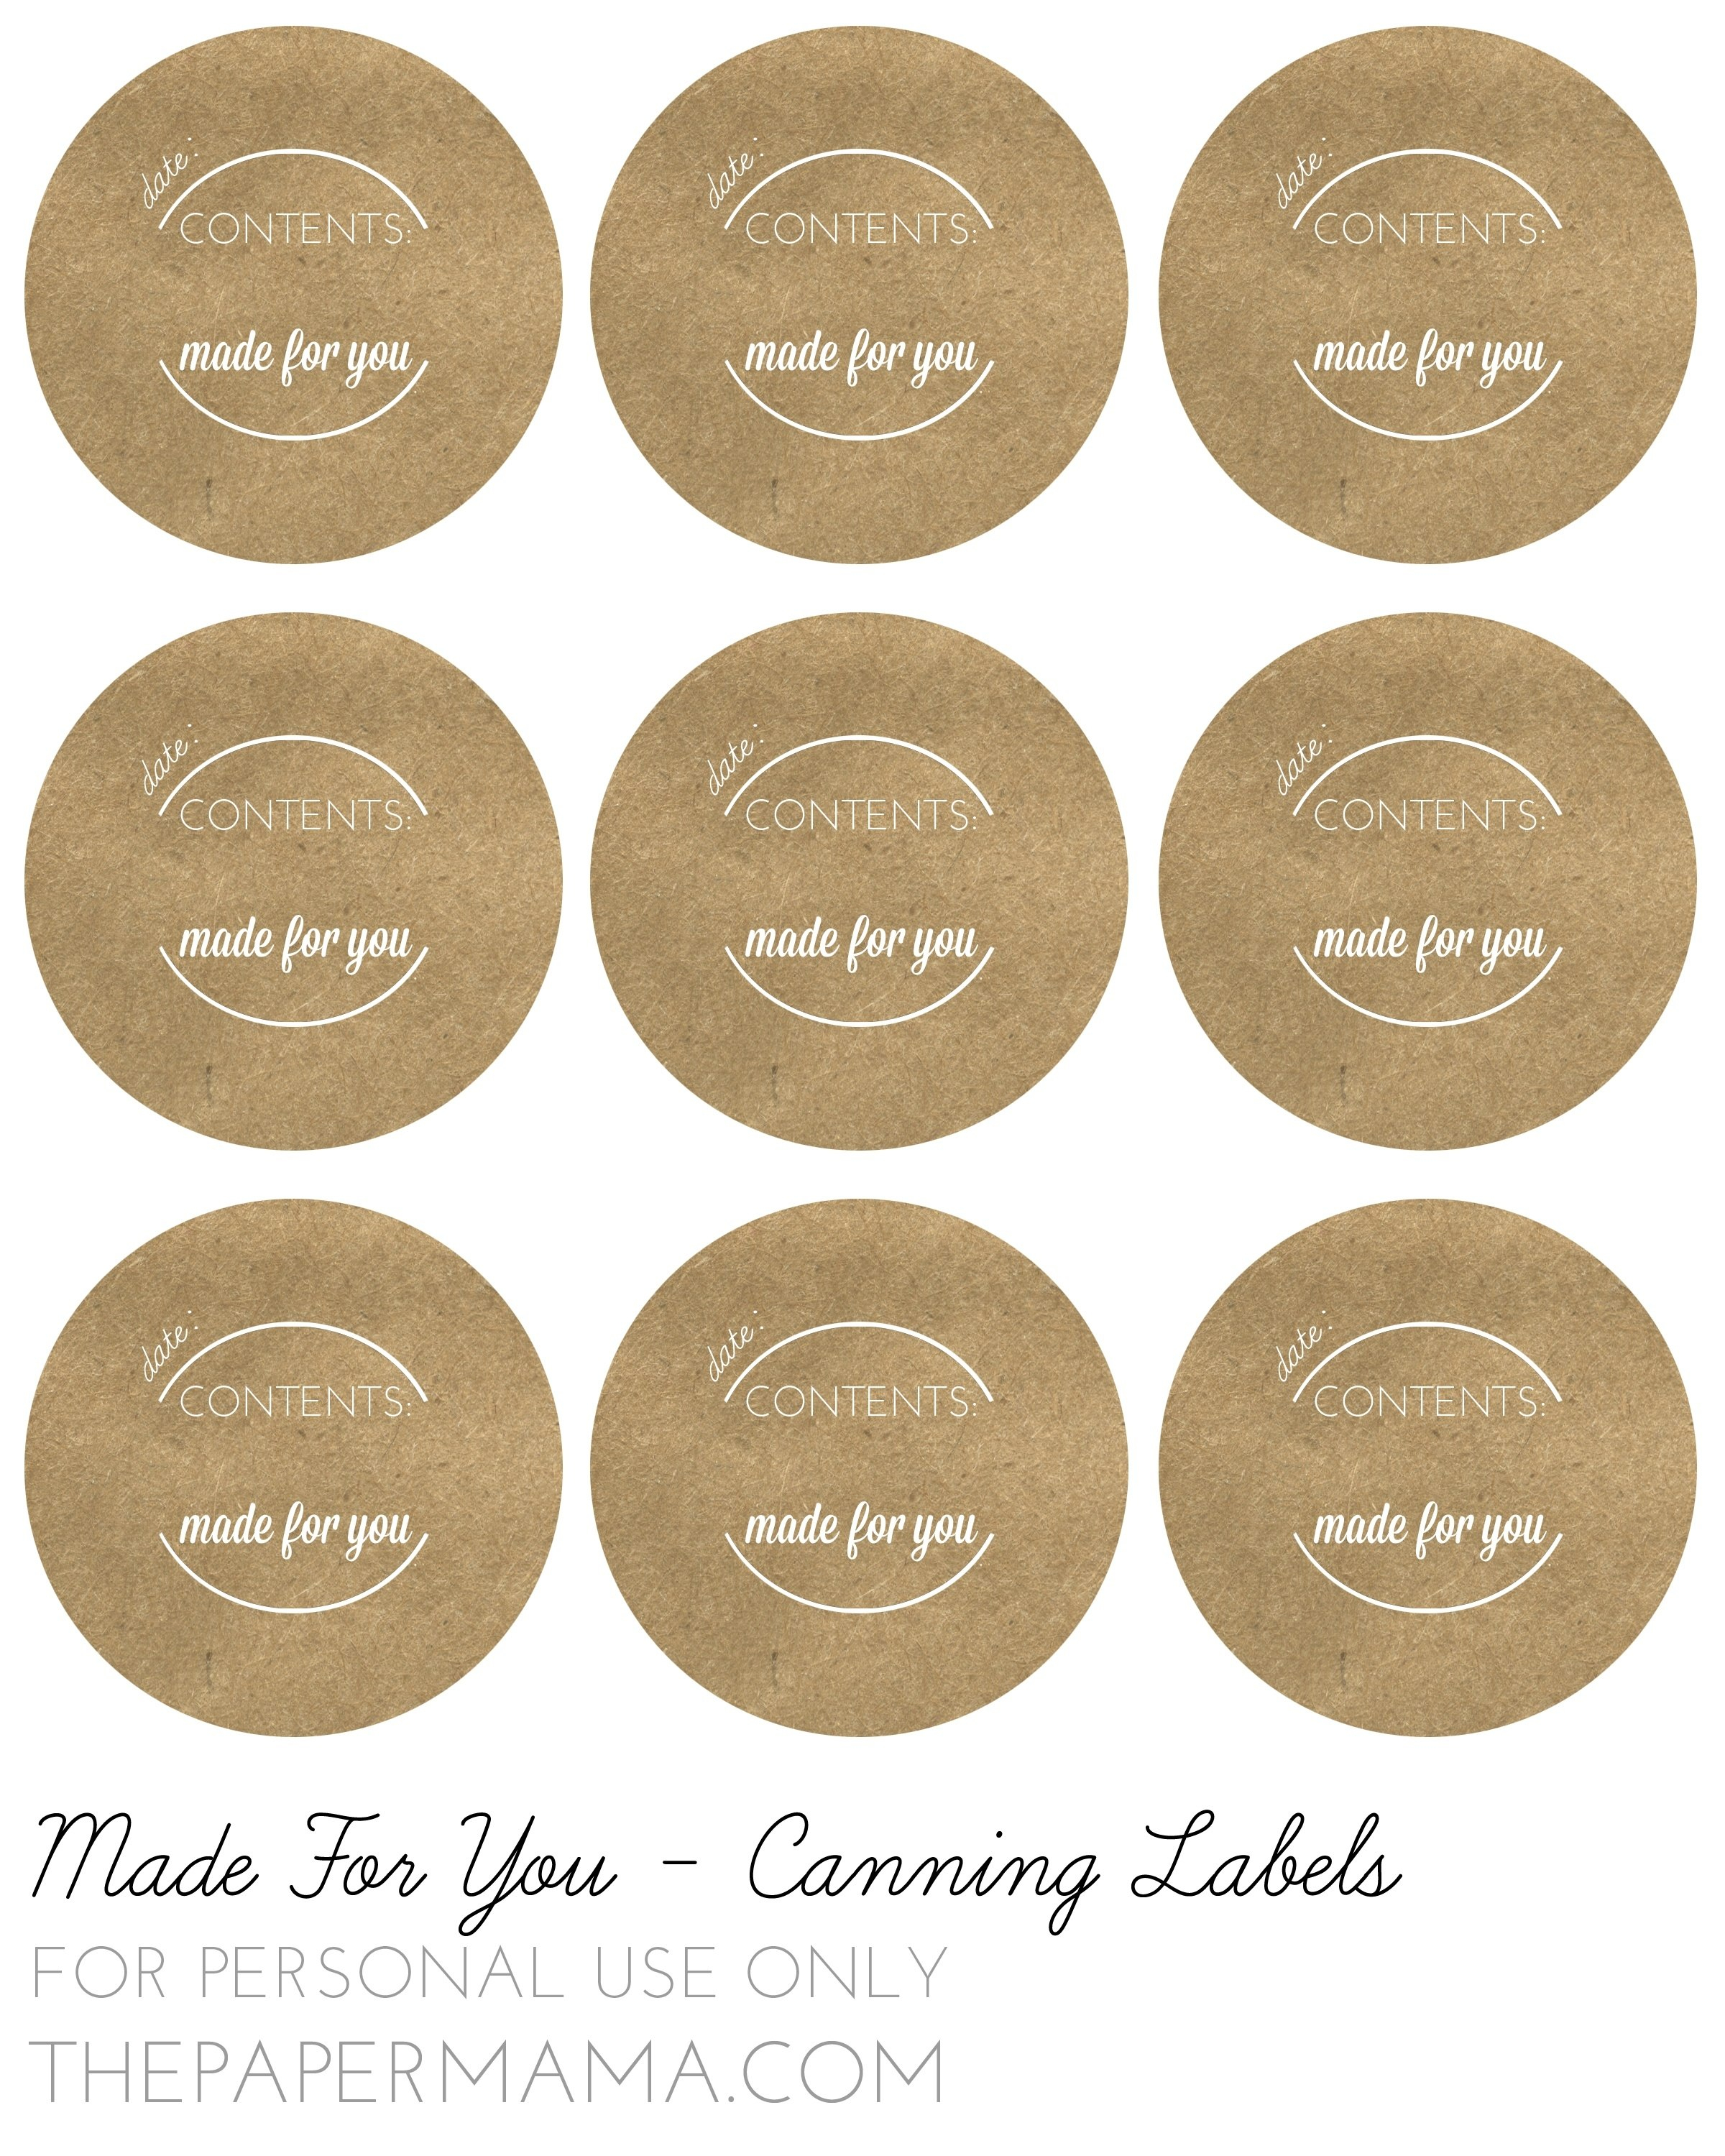 Free Jar Label Templates  World Of Label intended for Mason Jar Label Templates